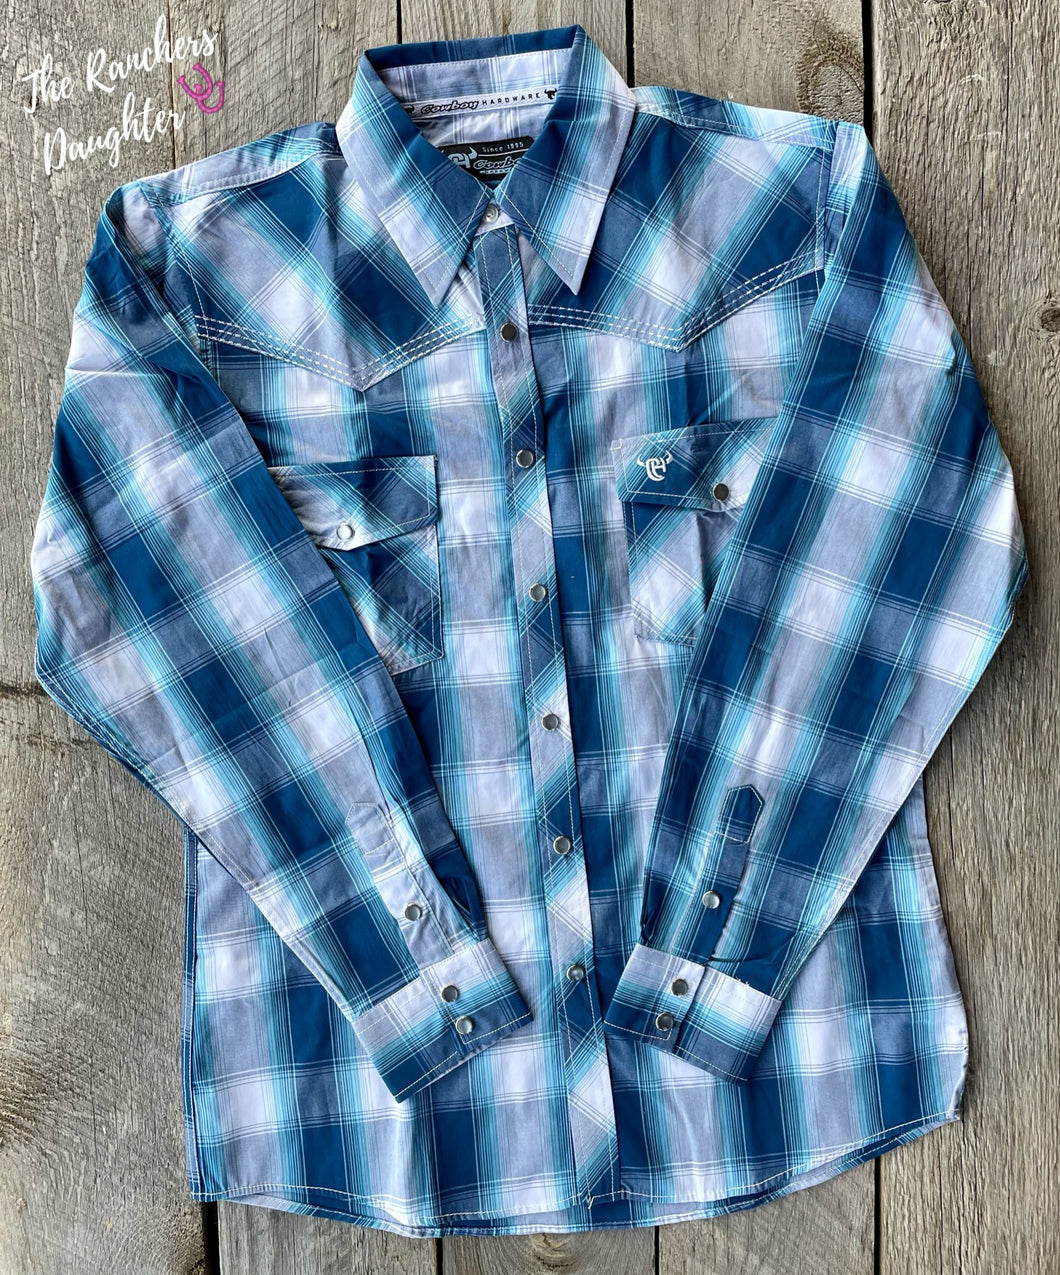 Teal/Turquoise Plaid Men’s Western Shirt